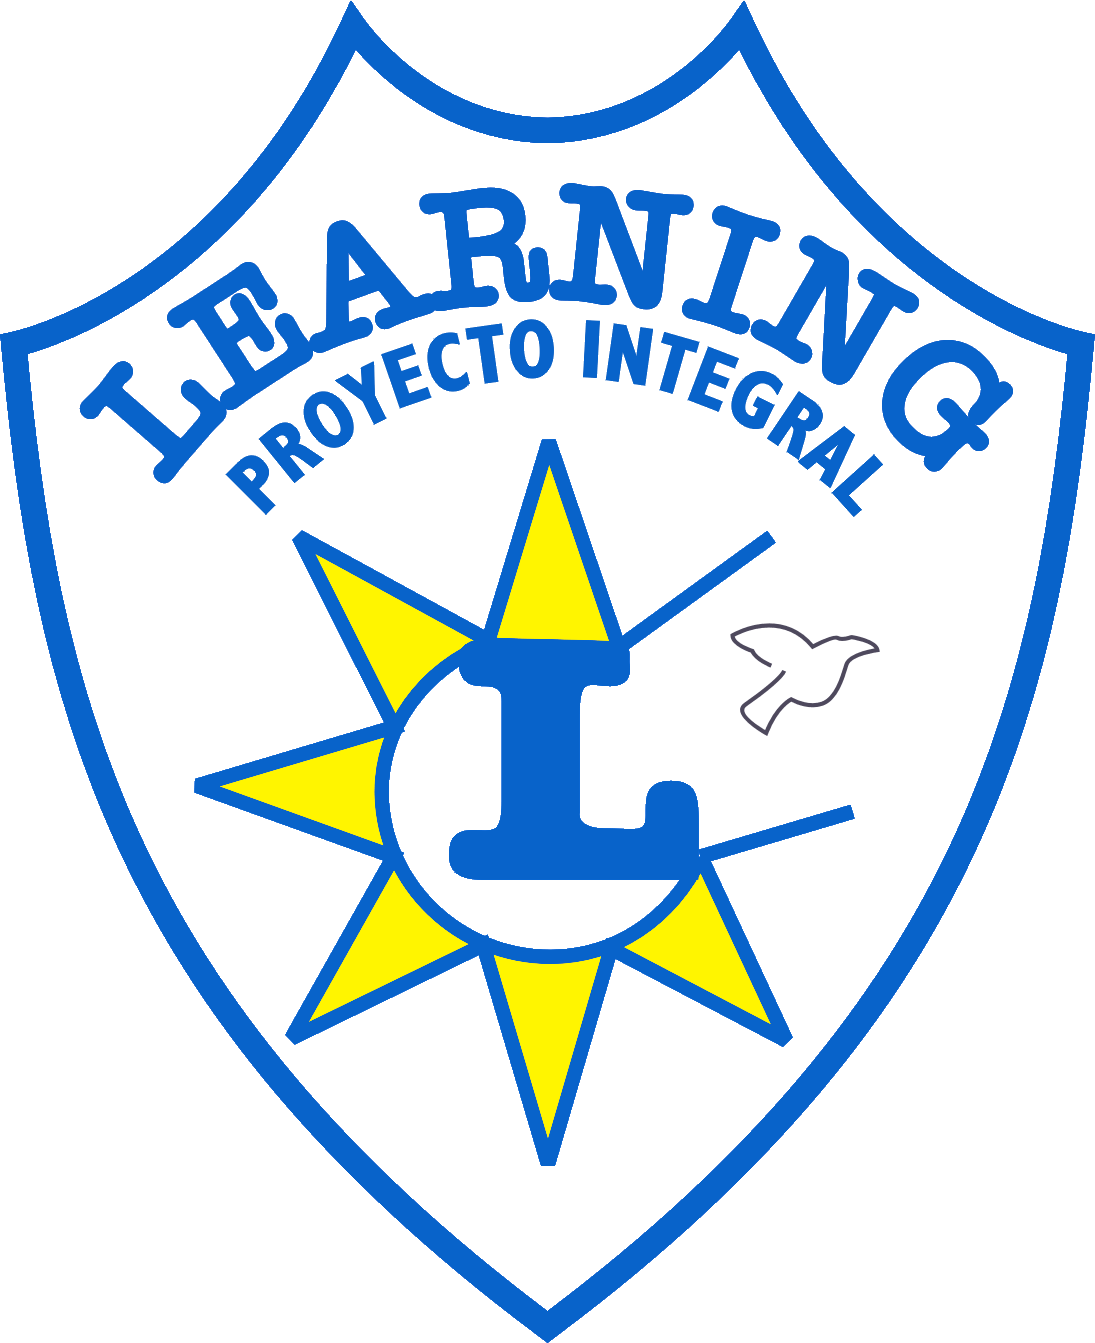 Learning Proyecto Integral